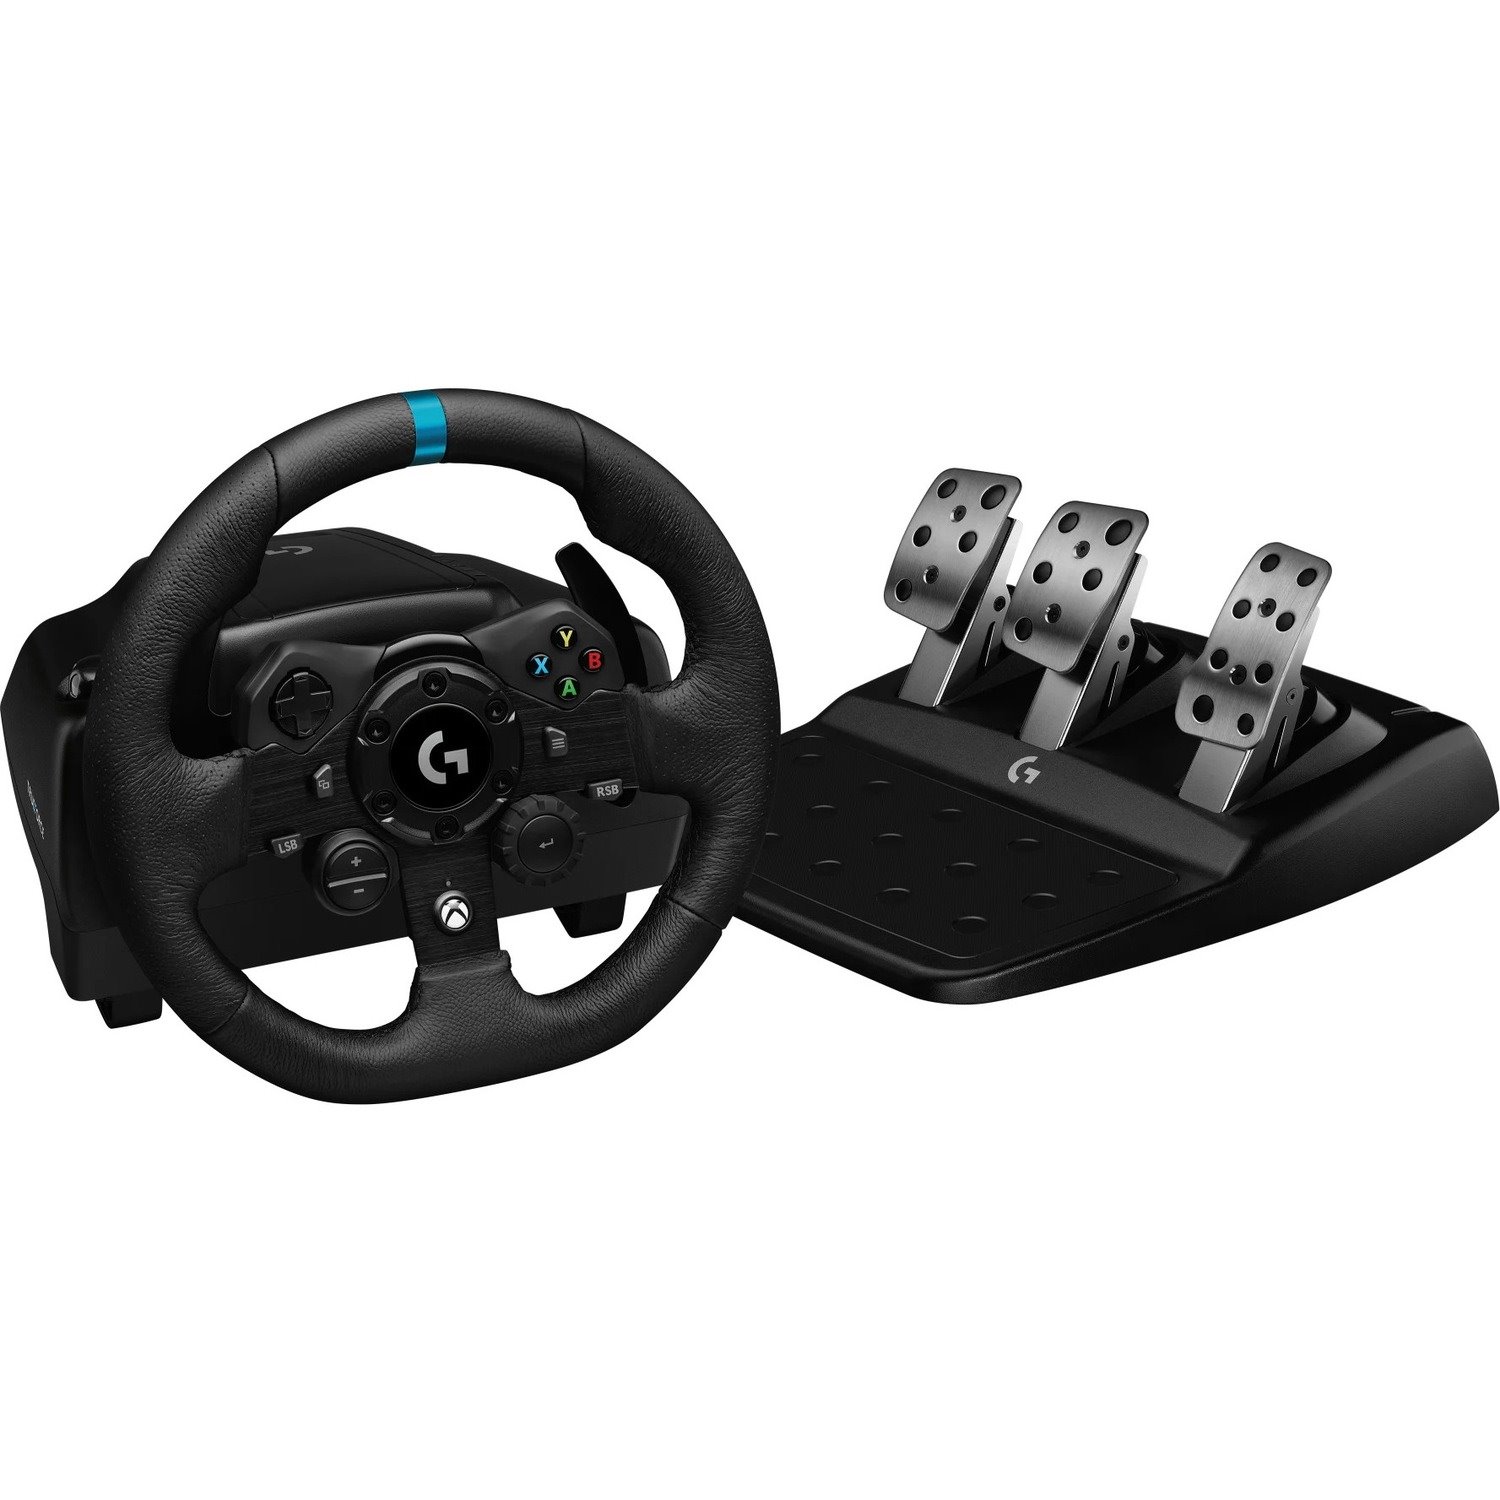 Logitech Racing Wheel and Pedals For Xbox One and PC